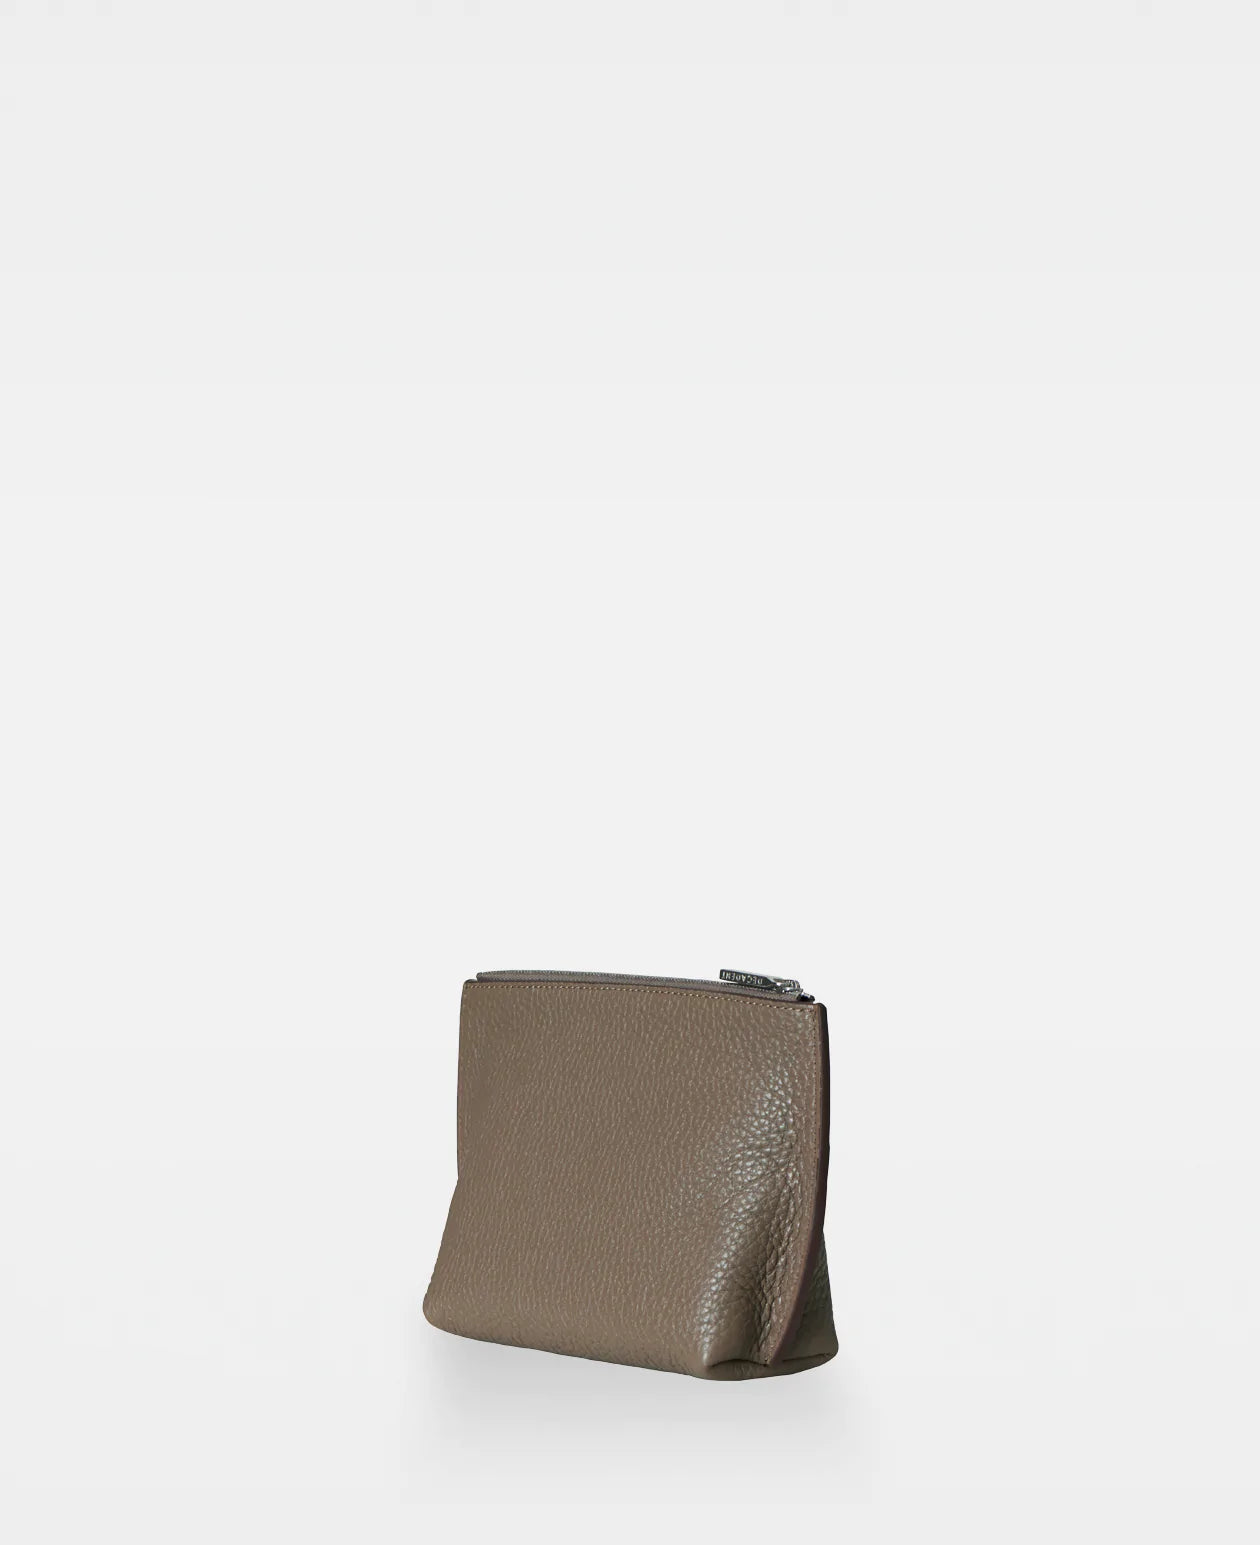 DECADENT - Talli Small Make-Up Bag in Clay